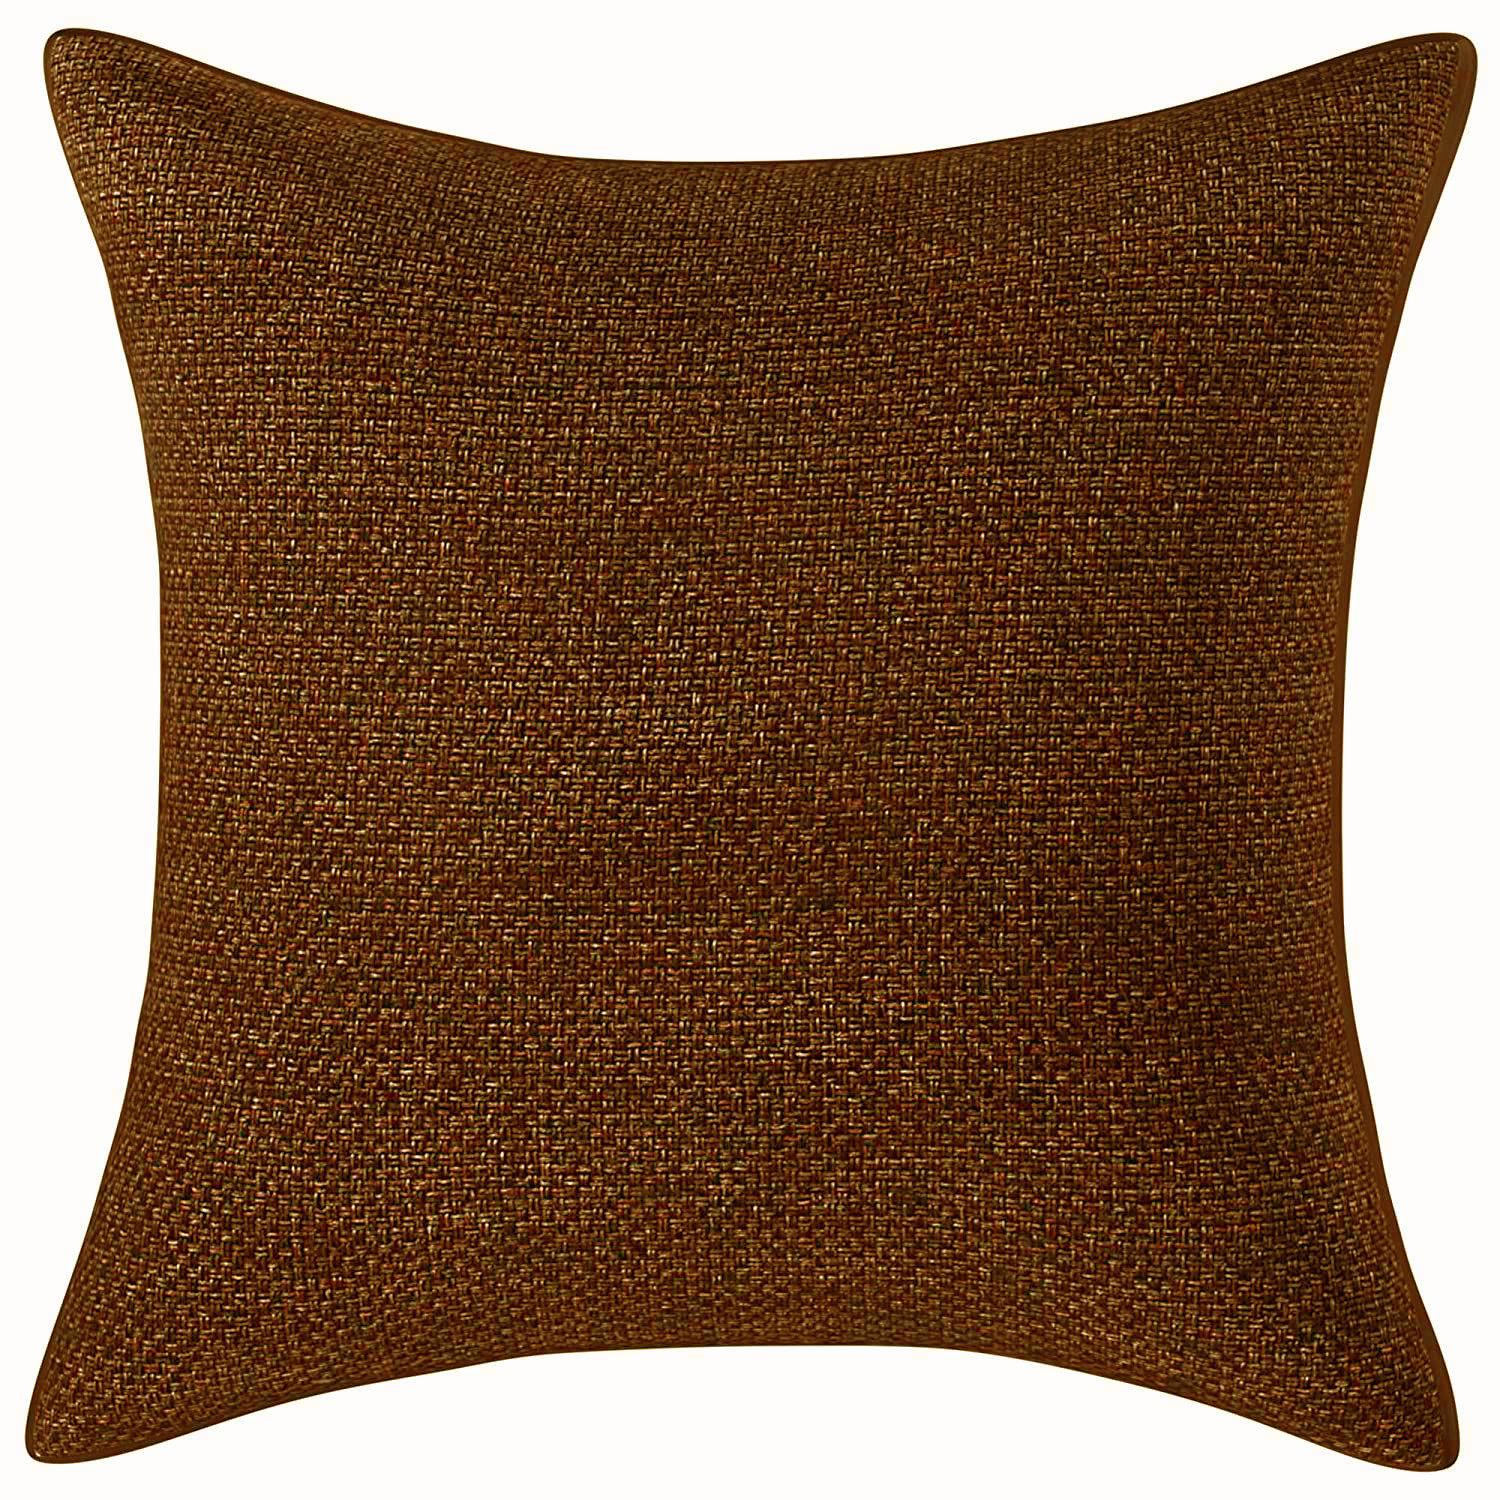 Kuber Industries Jute Cotton Decorative Square Cushion Cover, Cushion Case For Sofa Couch Bed 16x16 Inch-(Brown)